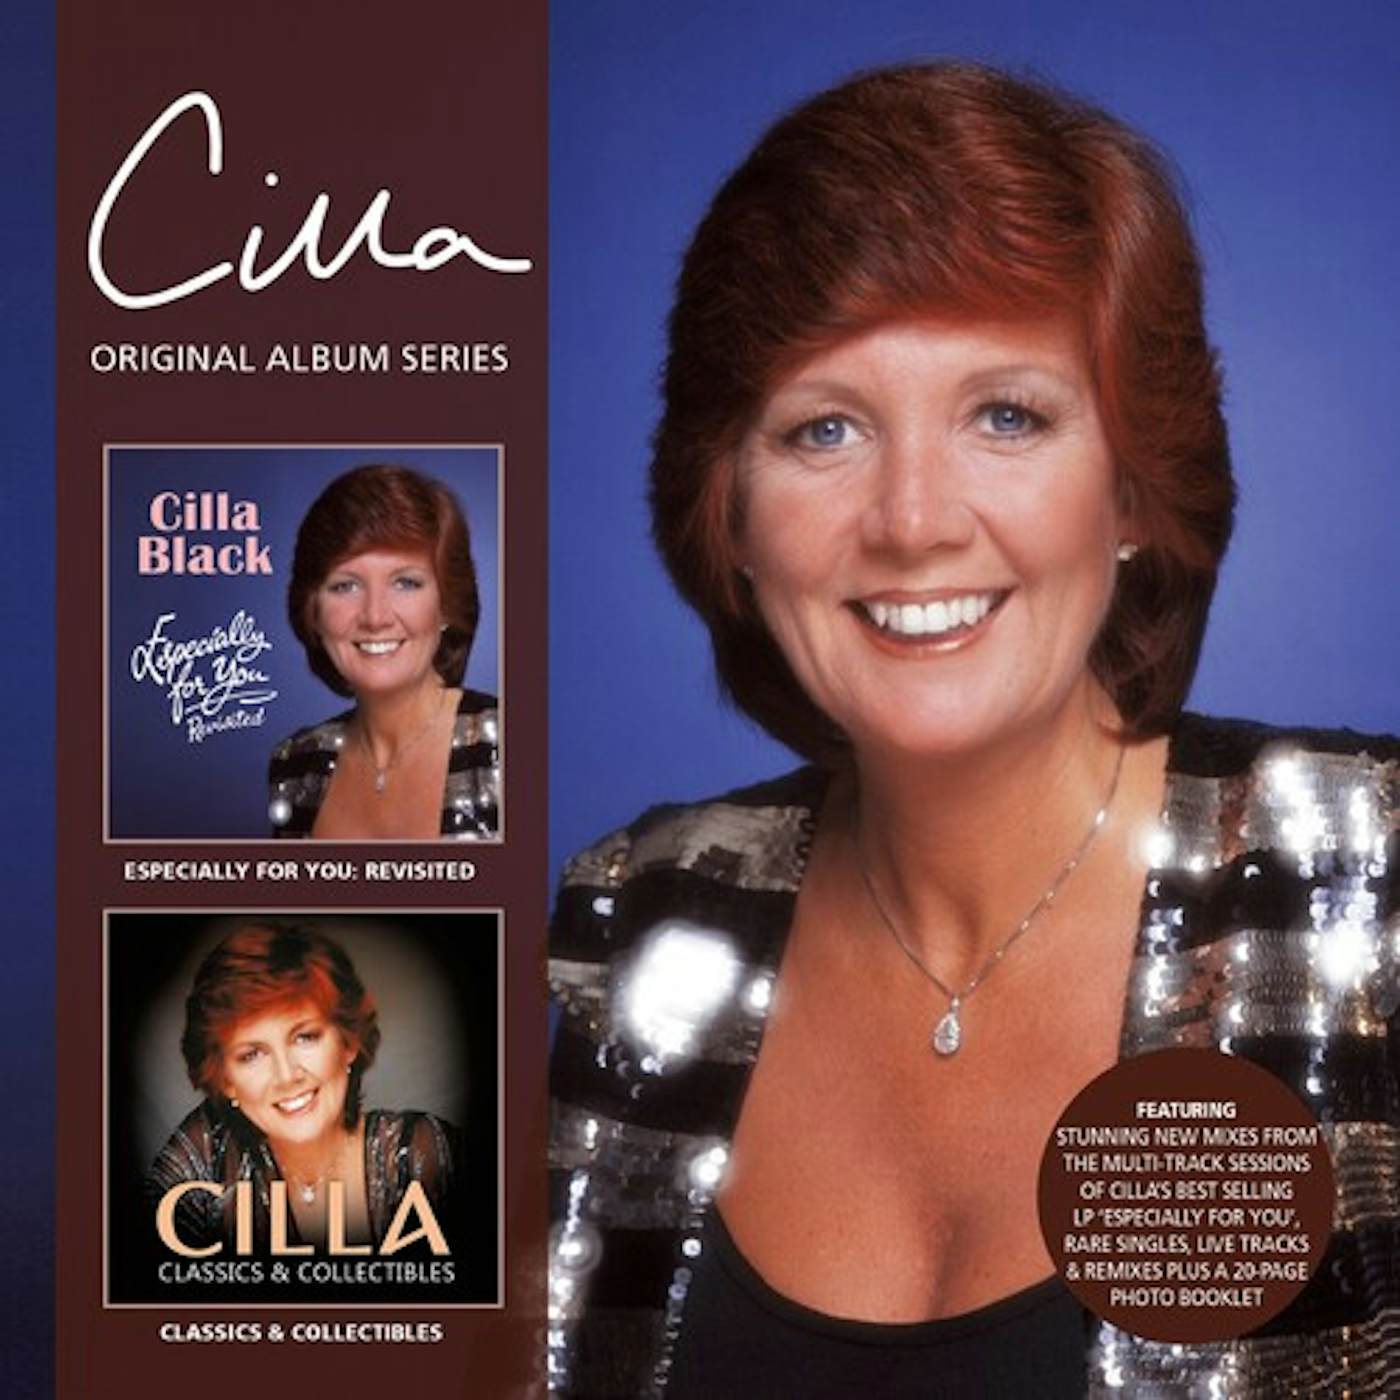 Cilla Black ESPECIALLY FOR YOU: REVISITED / CLASSICS & CD